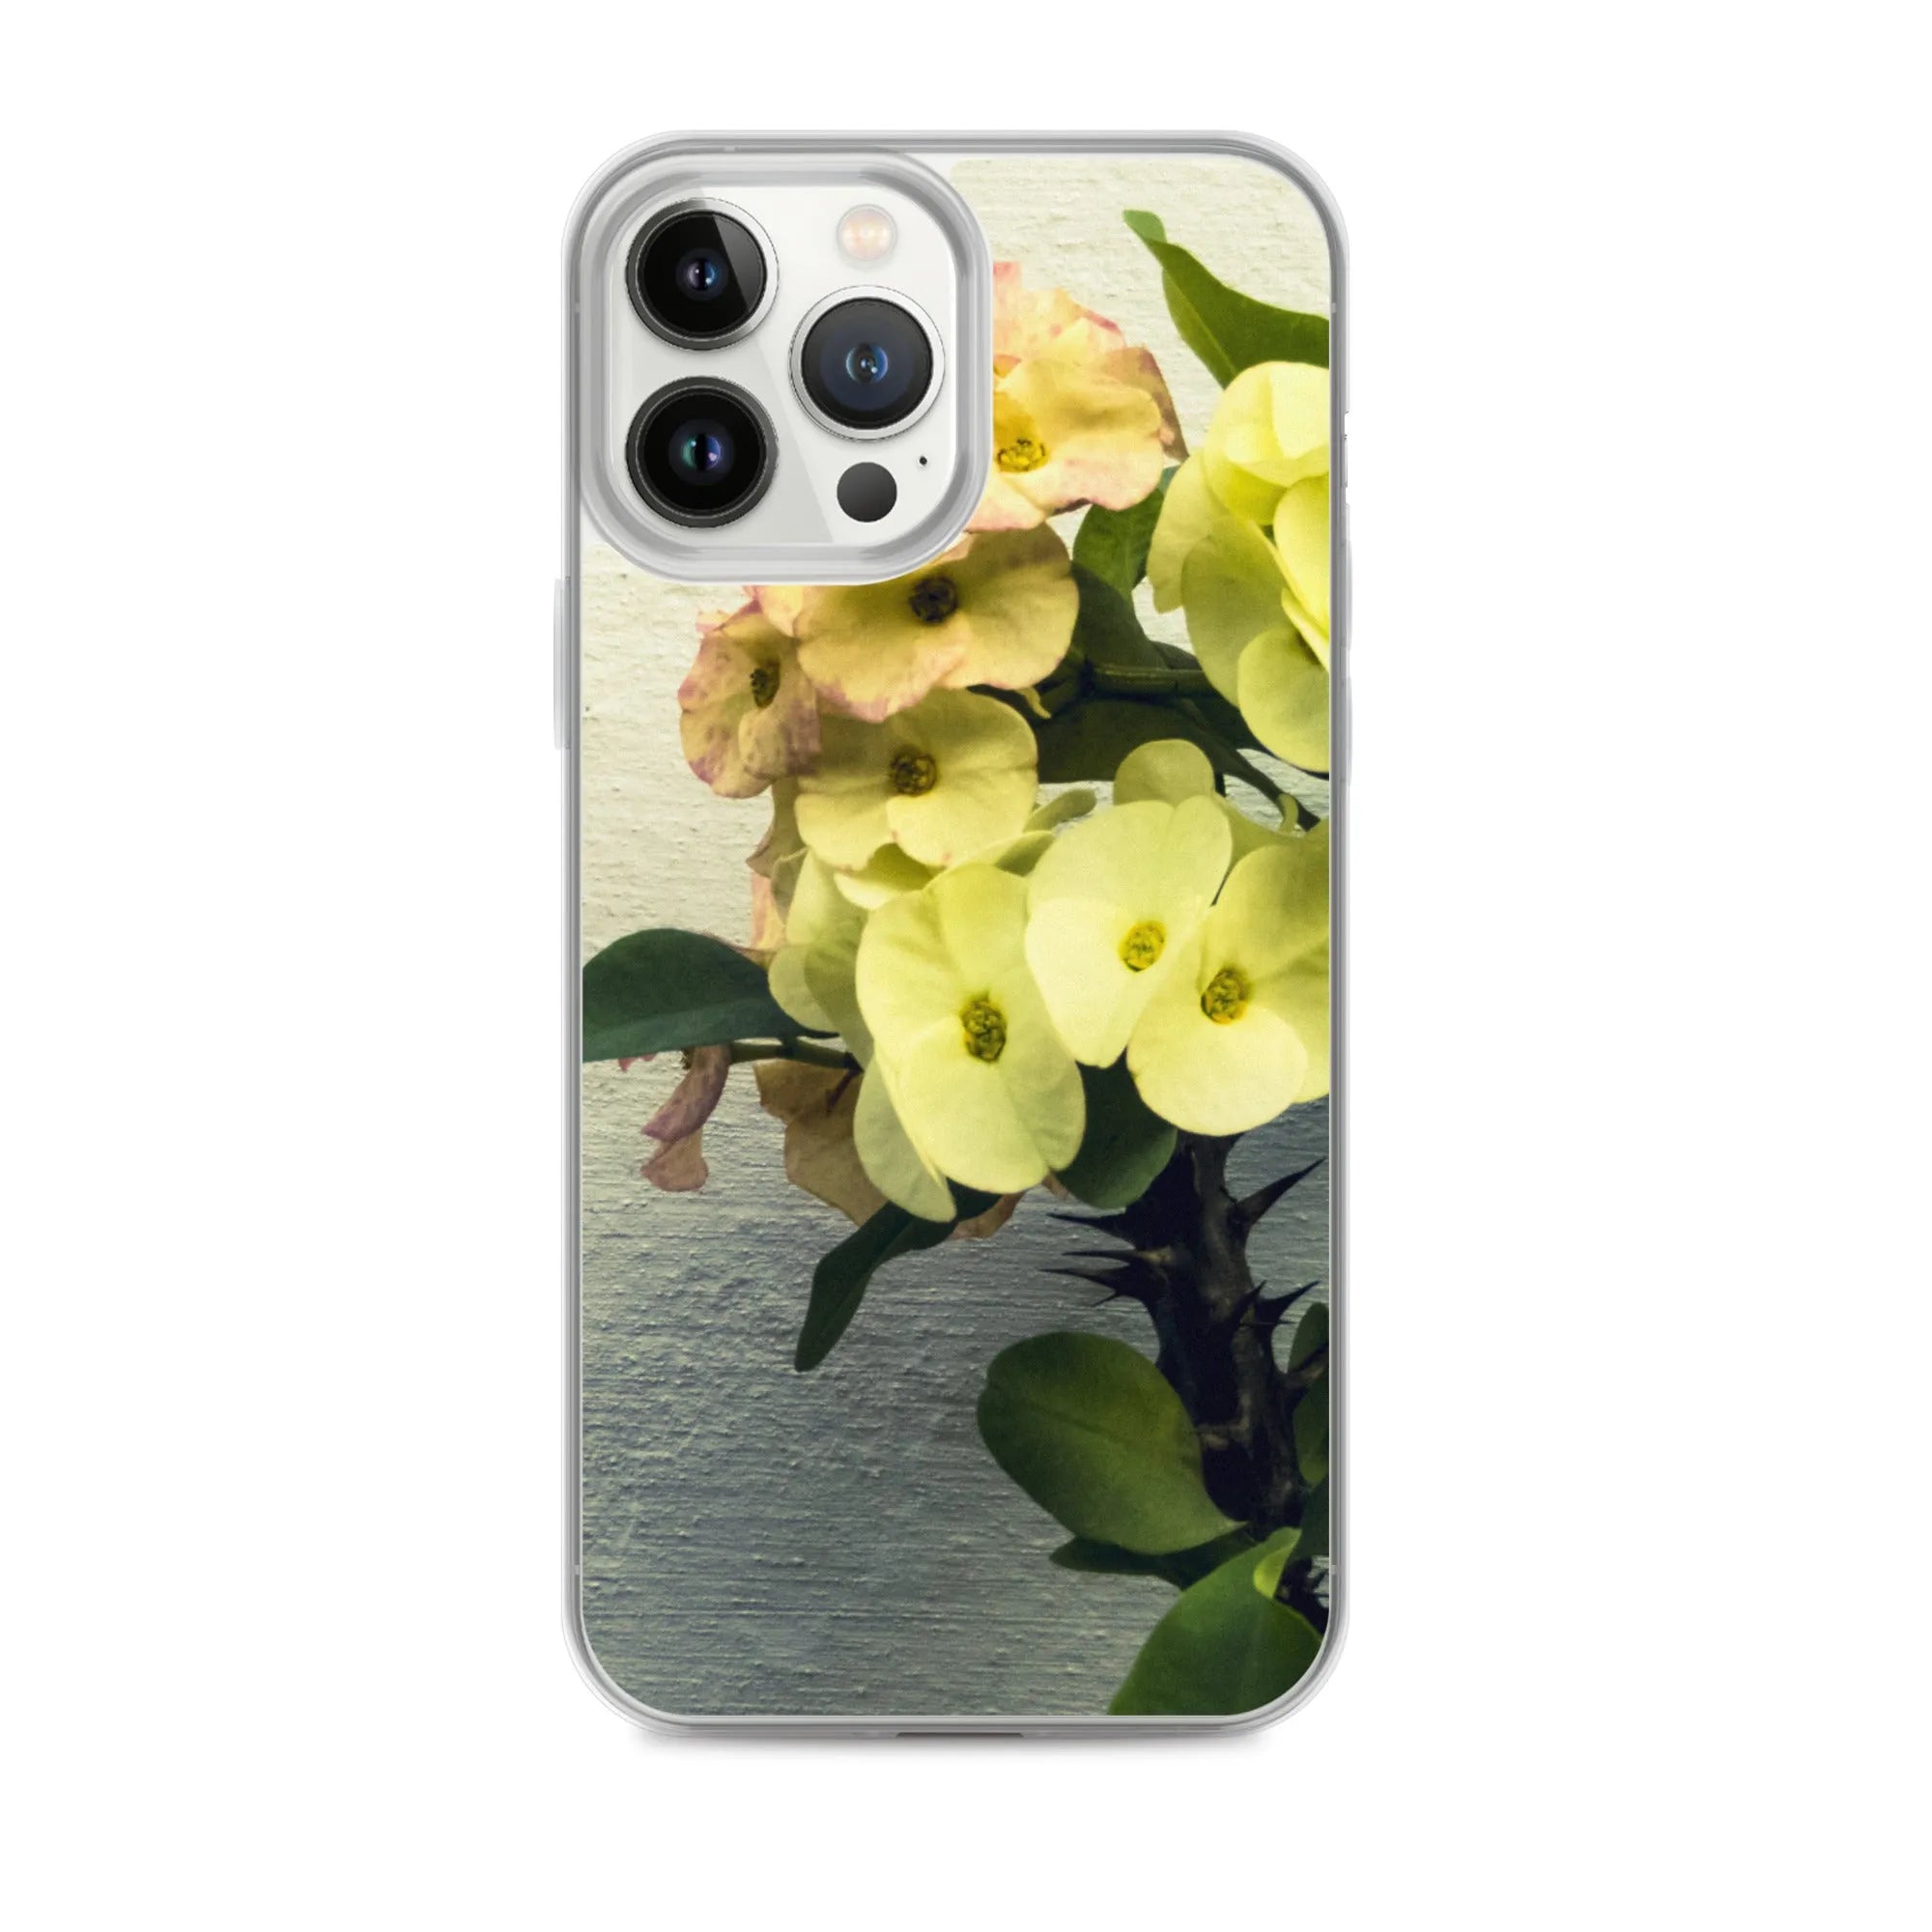 Wallflower Floral Iphone Case - Iphone 13 Pro Max - Mobile Phone Cases - Aesthetic Art